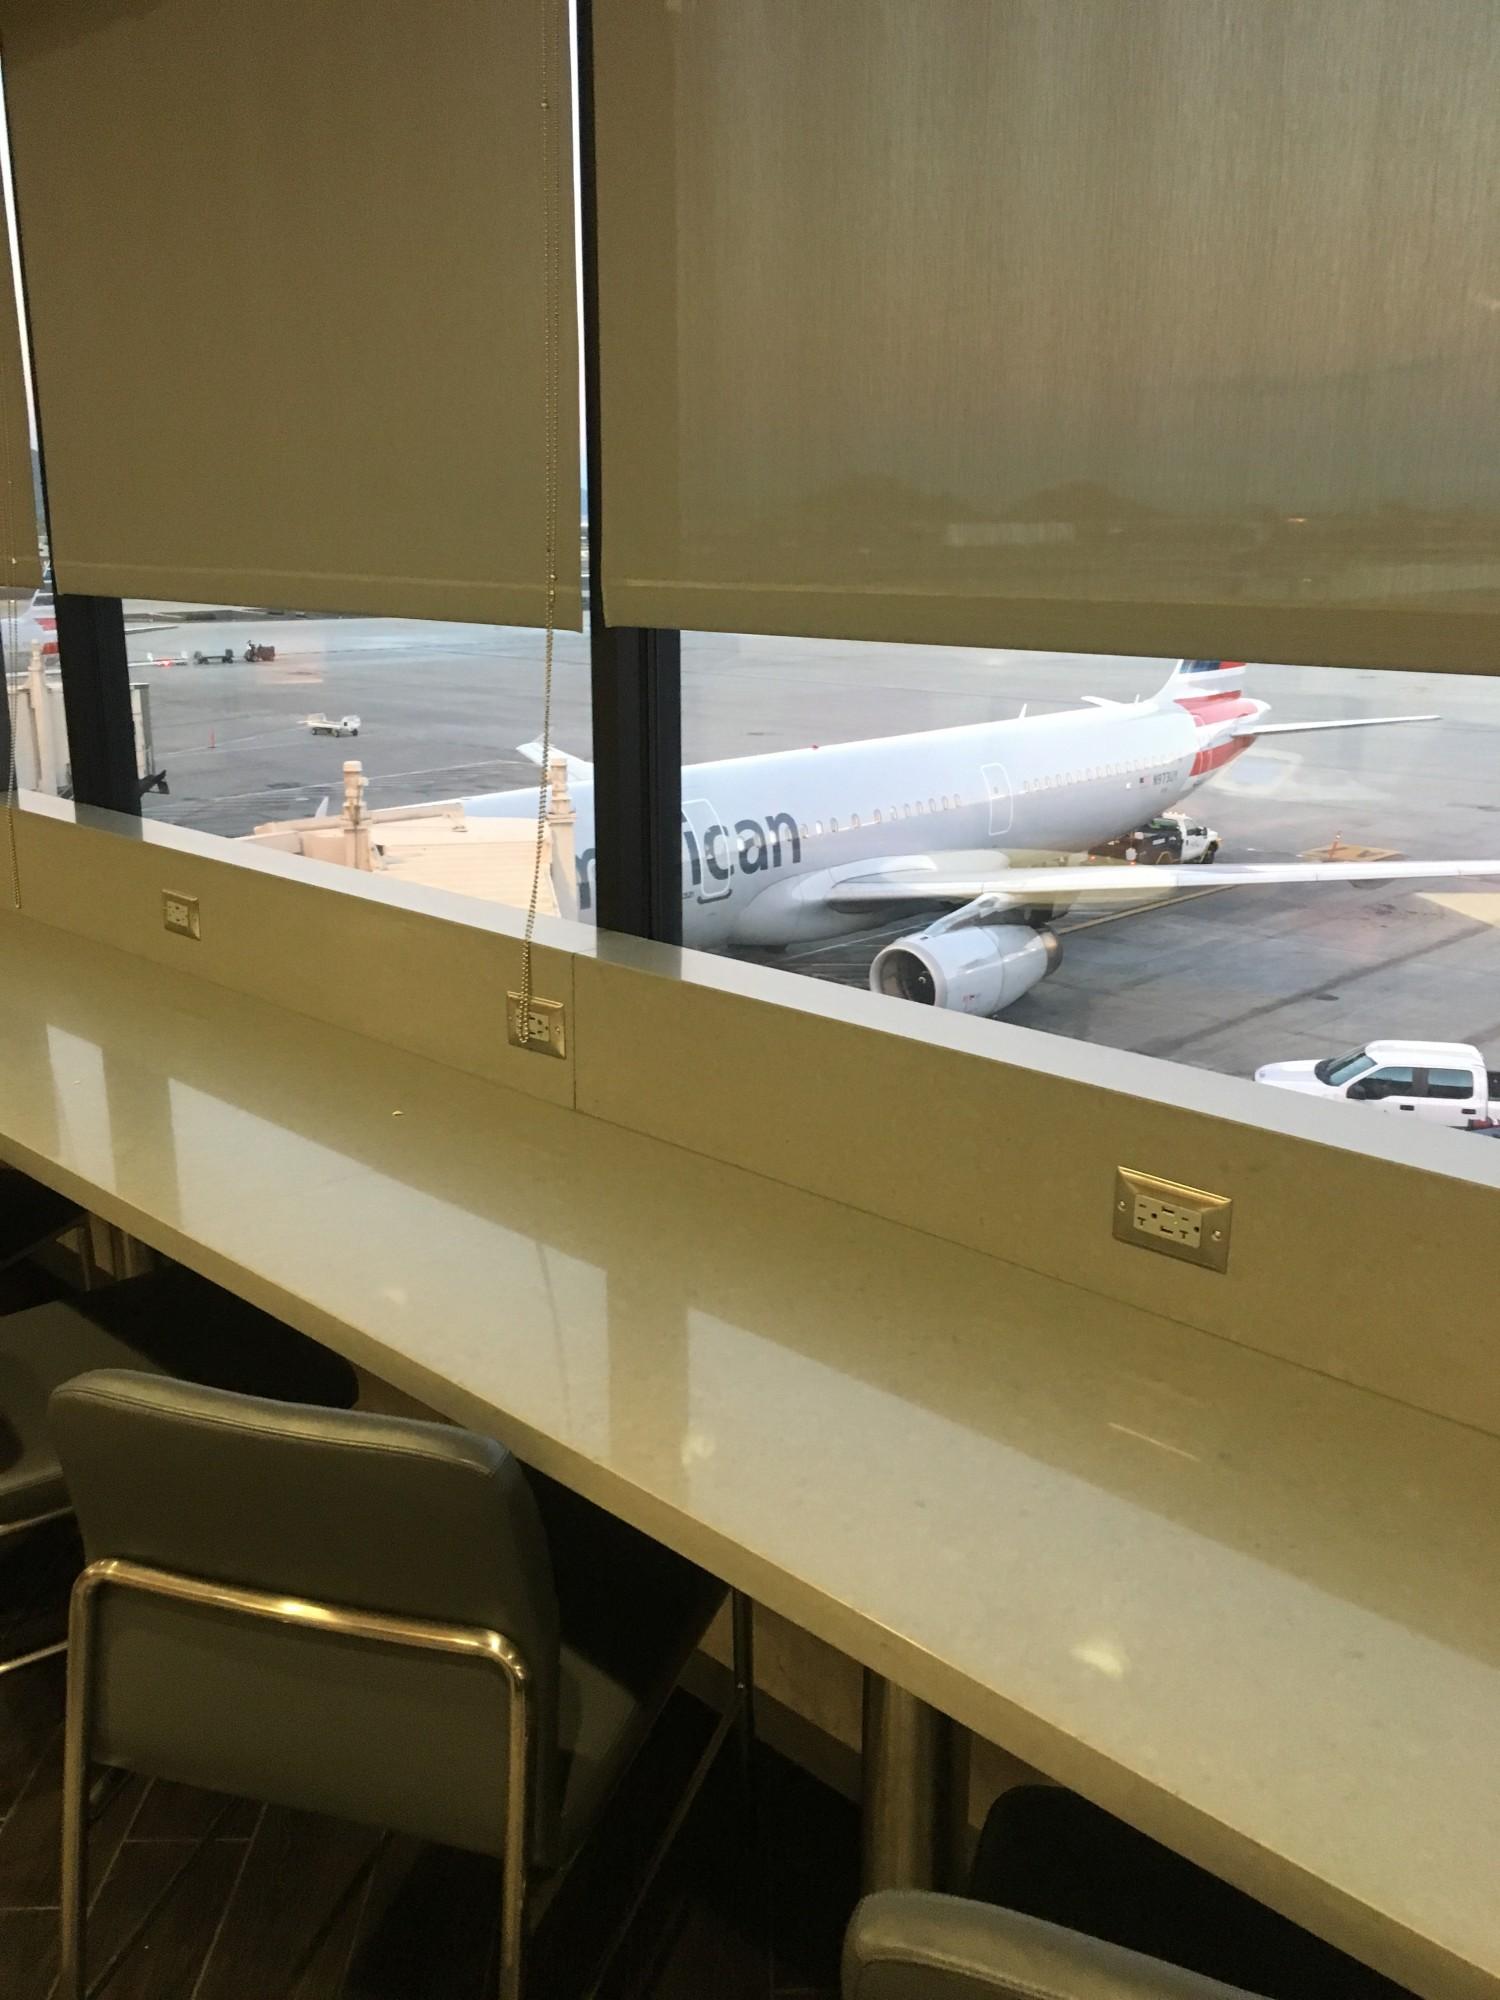 American Airlines Admirals Club (Gate A7) image 18 of 25